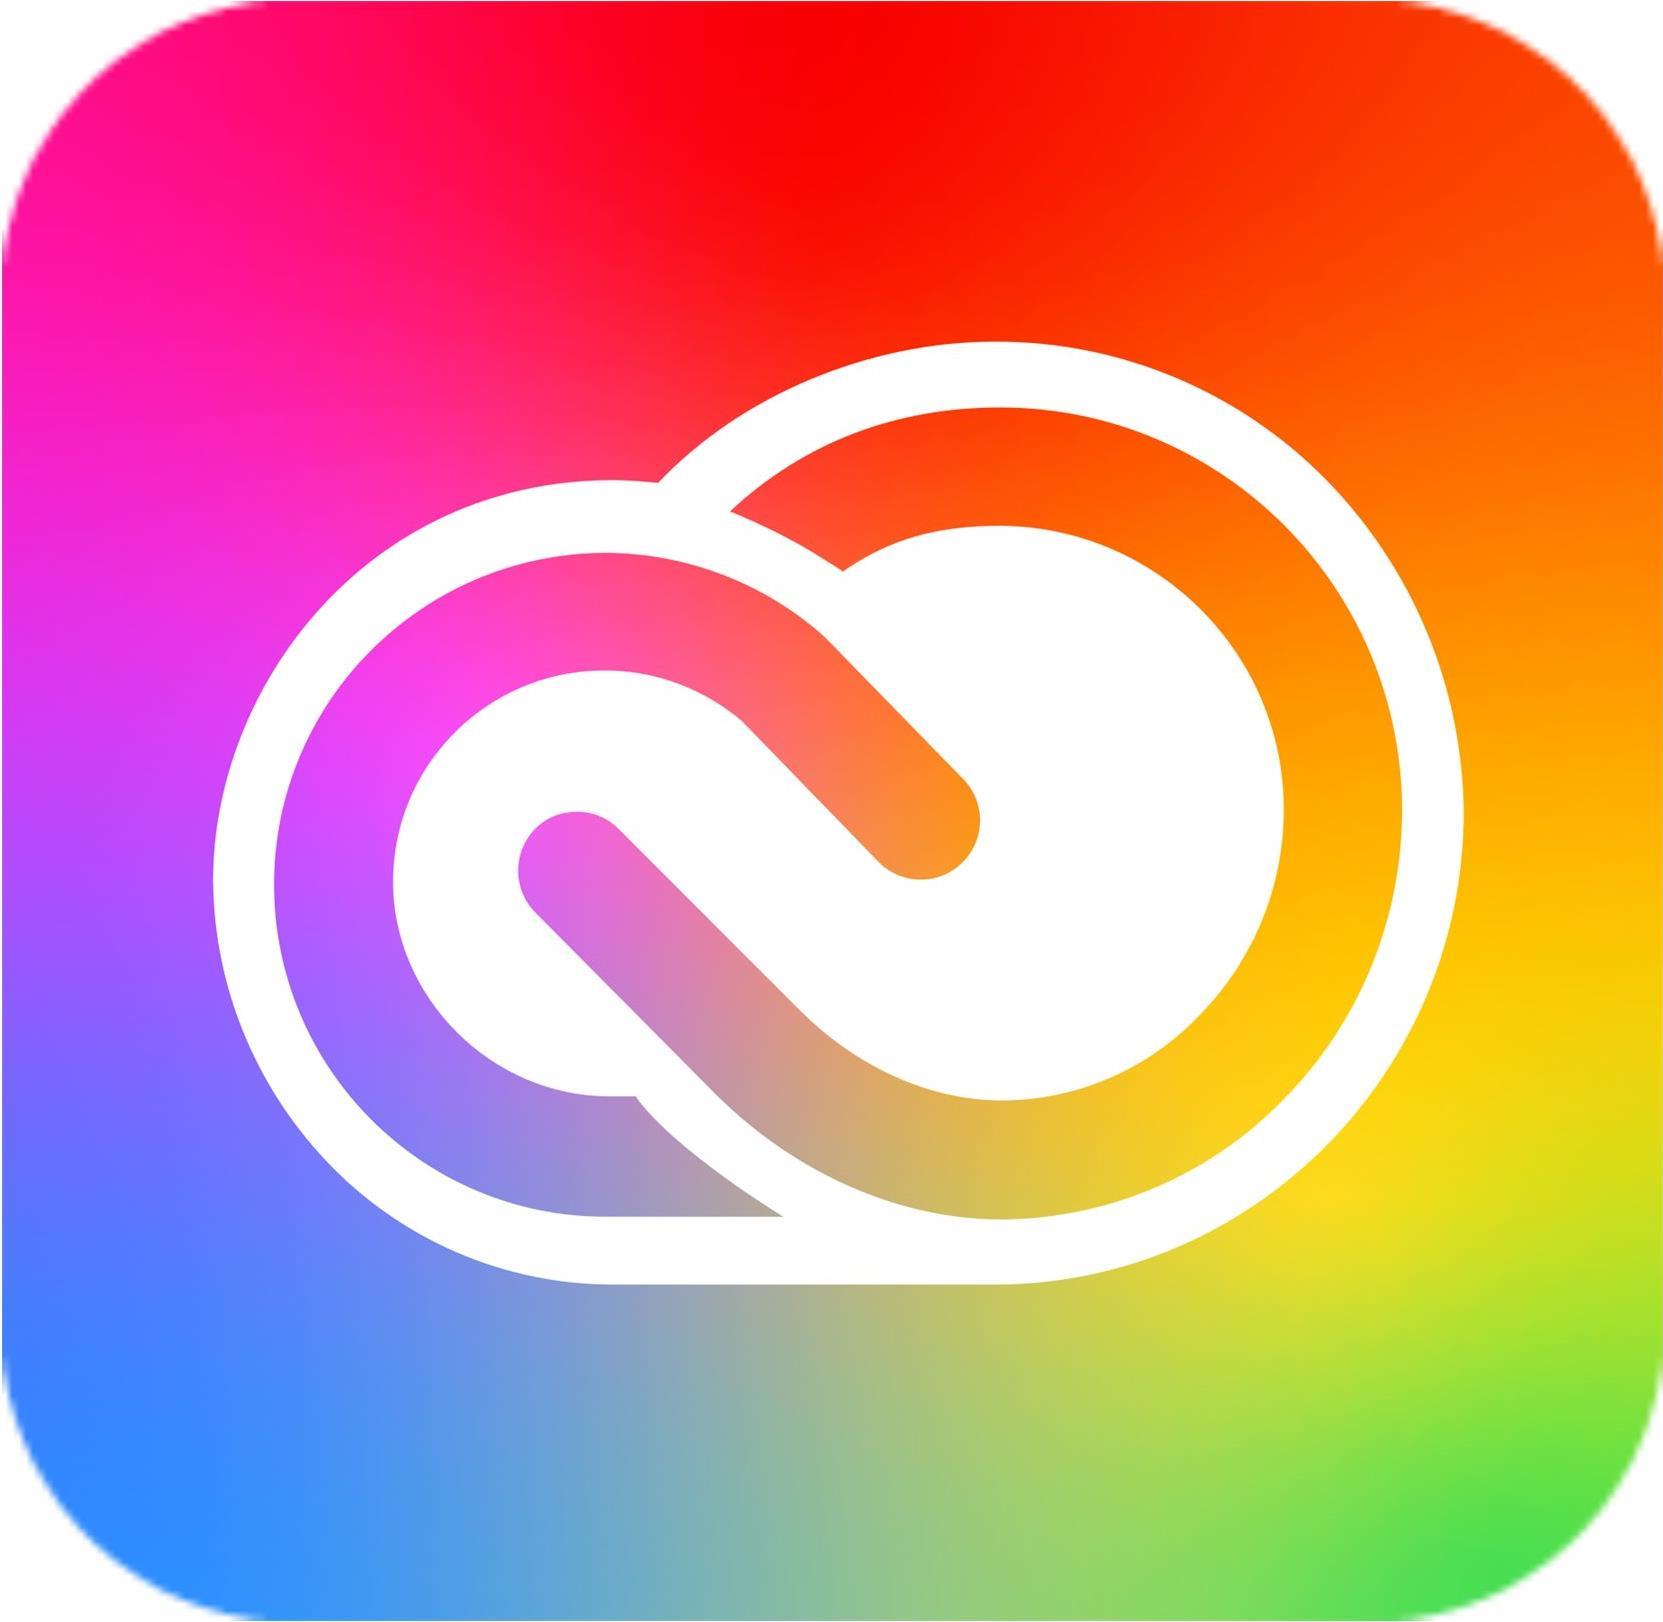 Adobe Creative Cloud All Apps - Pro for teams - Subscription Renewal - 1 Benutzer - VIP Select - Stufe 14 (100+) - 3 years commitment - Win, Mac - EU English von Adobe